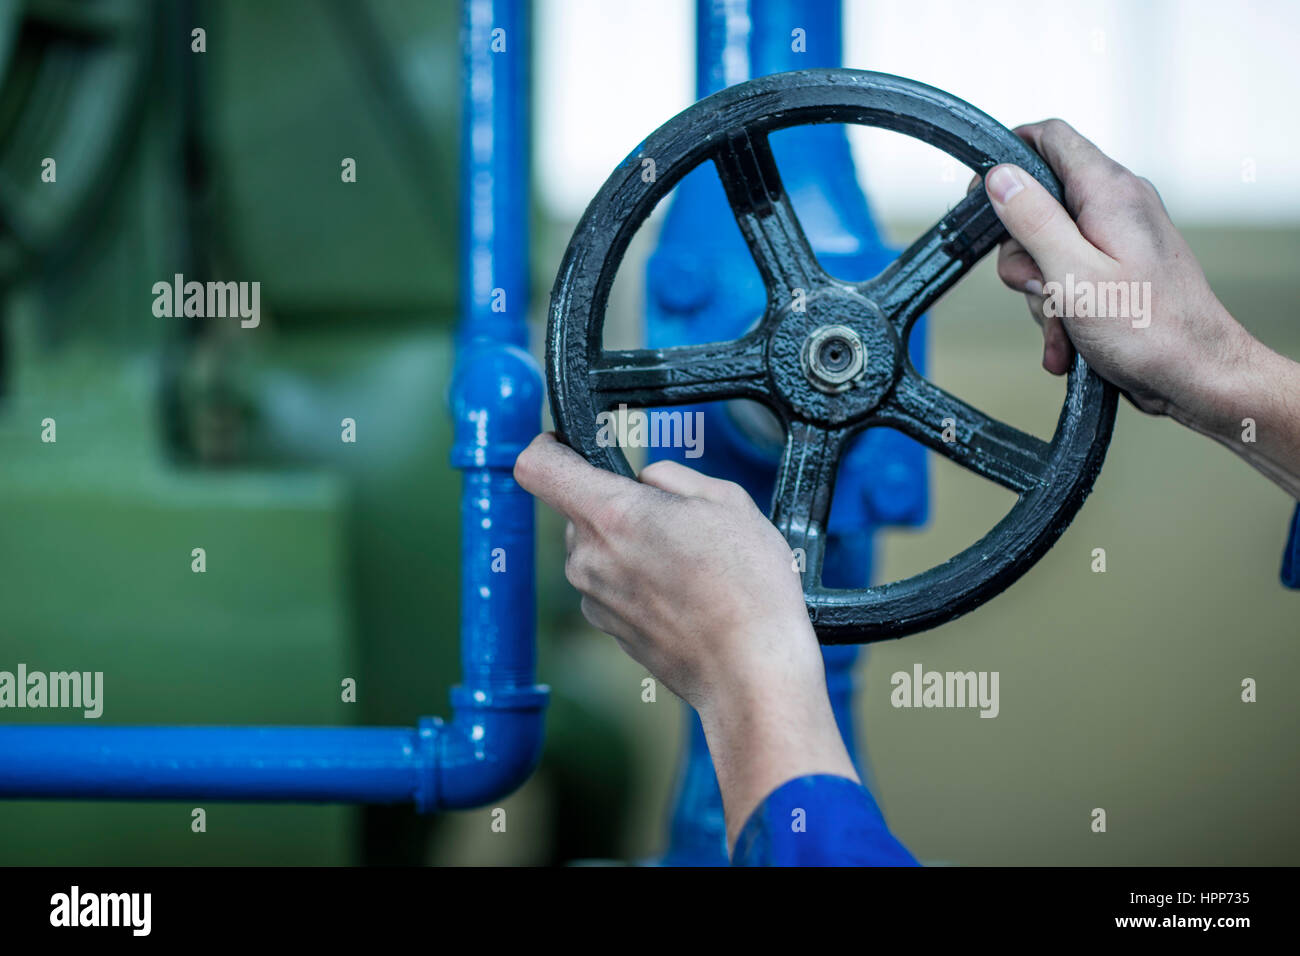 Hands turning valve in factory Stock Photo